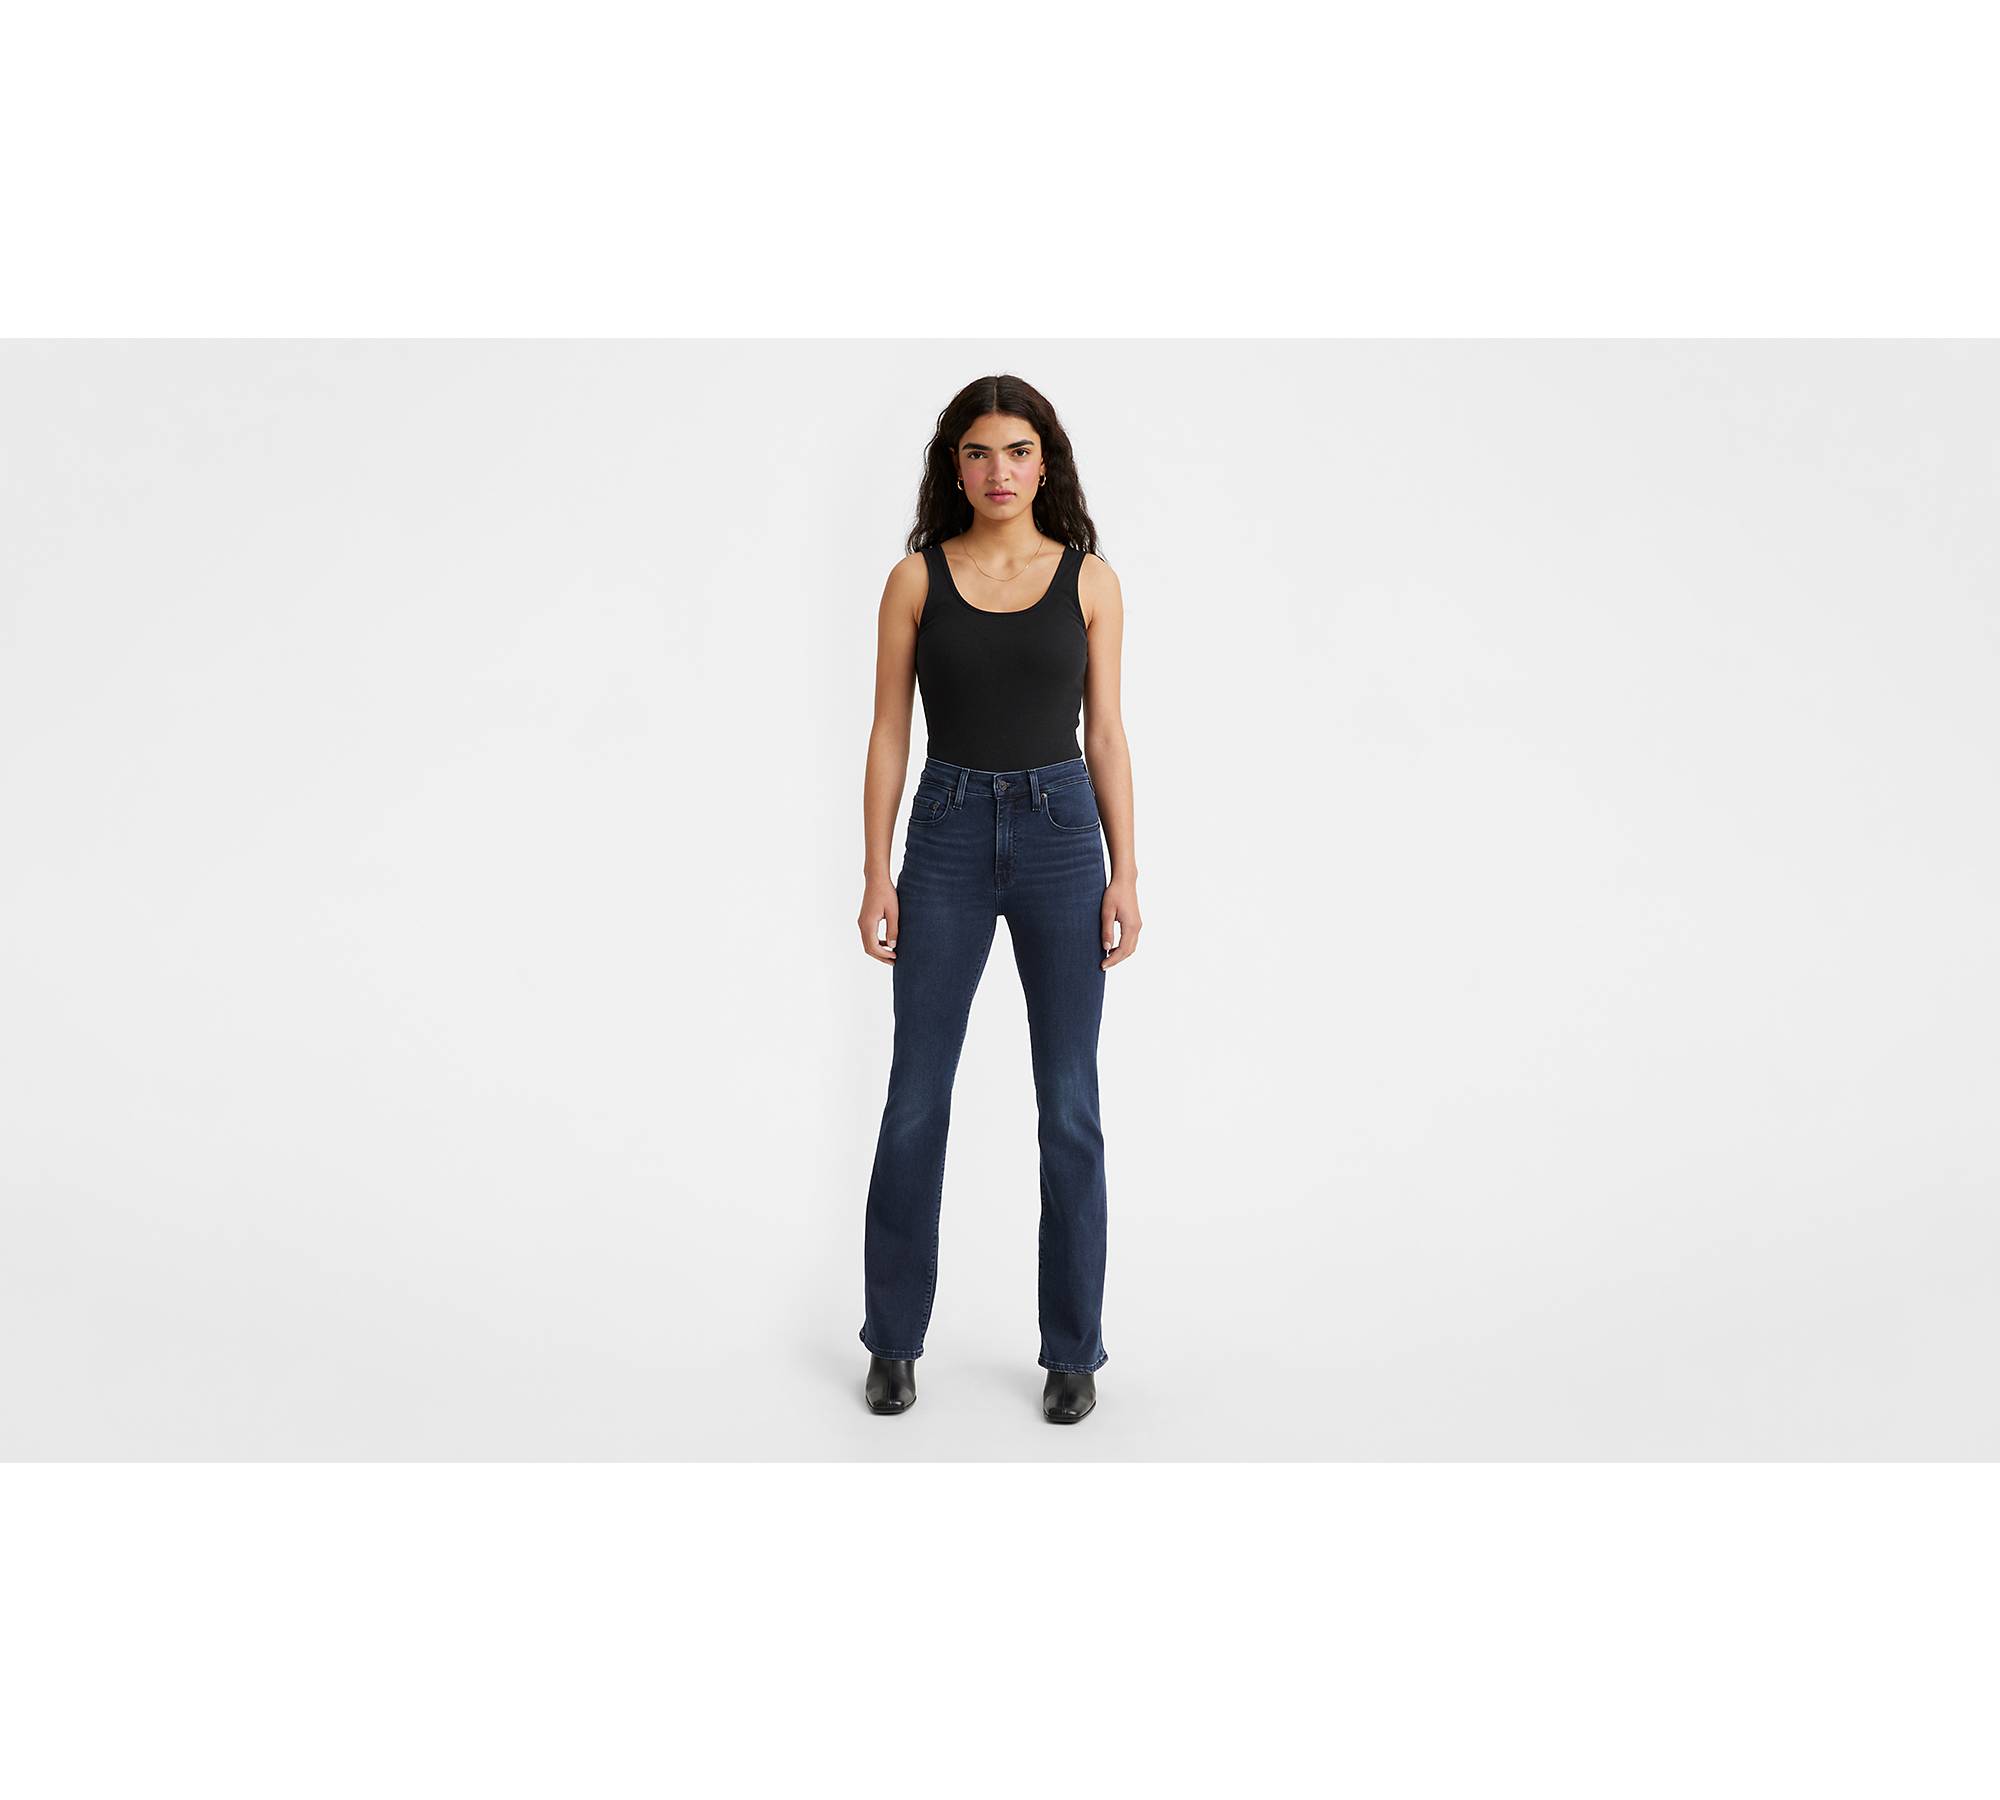 Le Silhouette Slim Bootcut Jeans In Long Inseam With High Rise - Precious  Blue